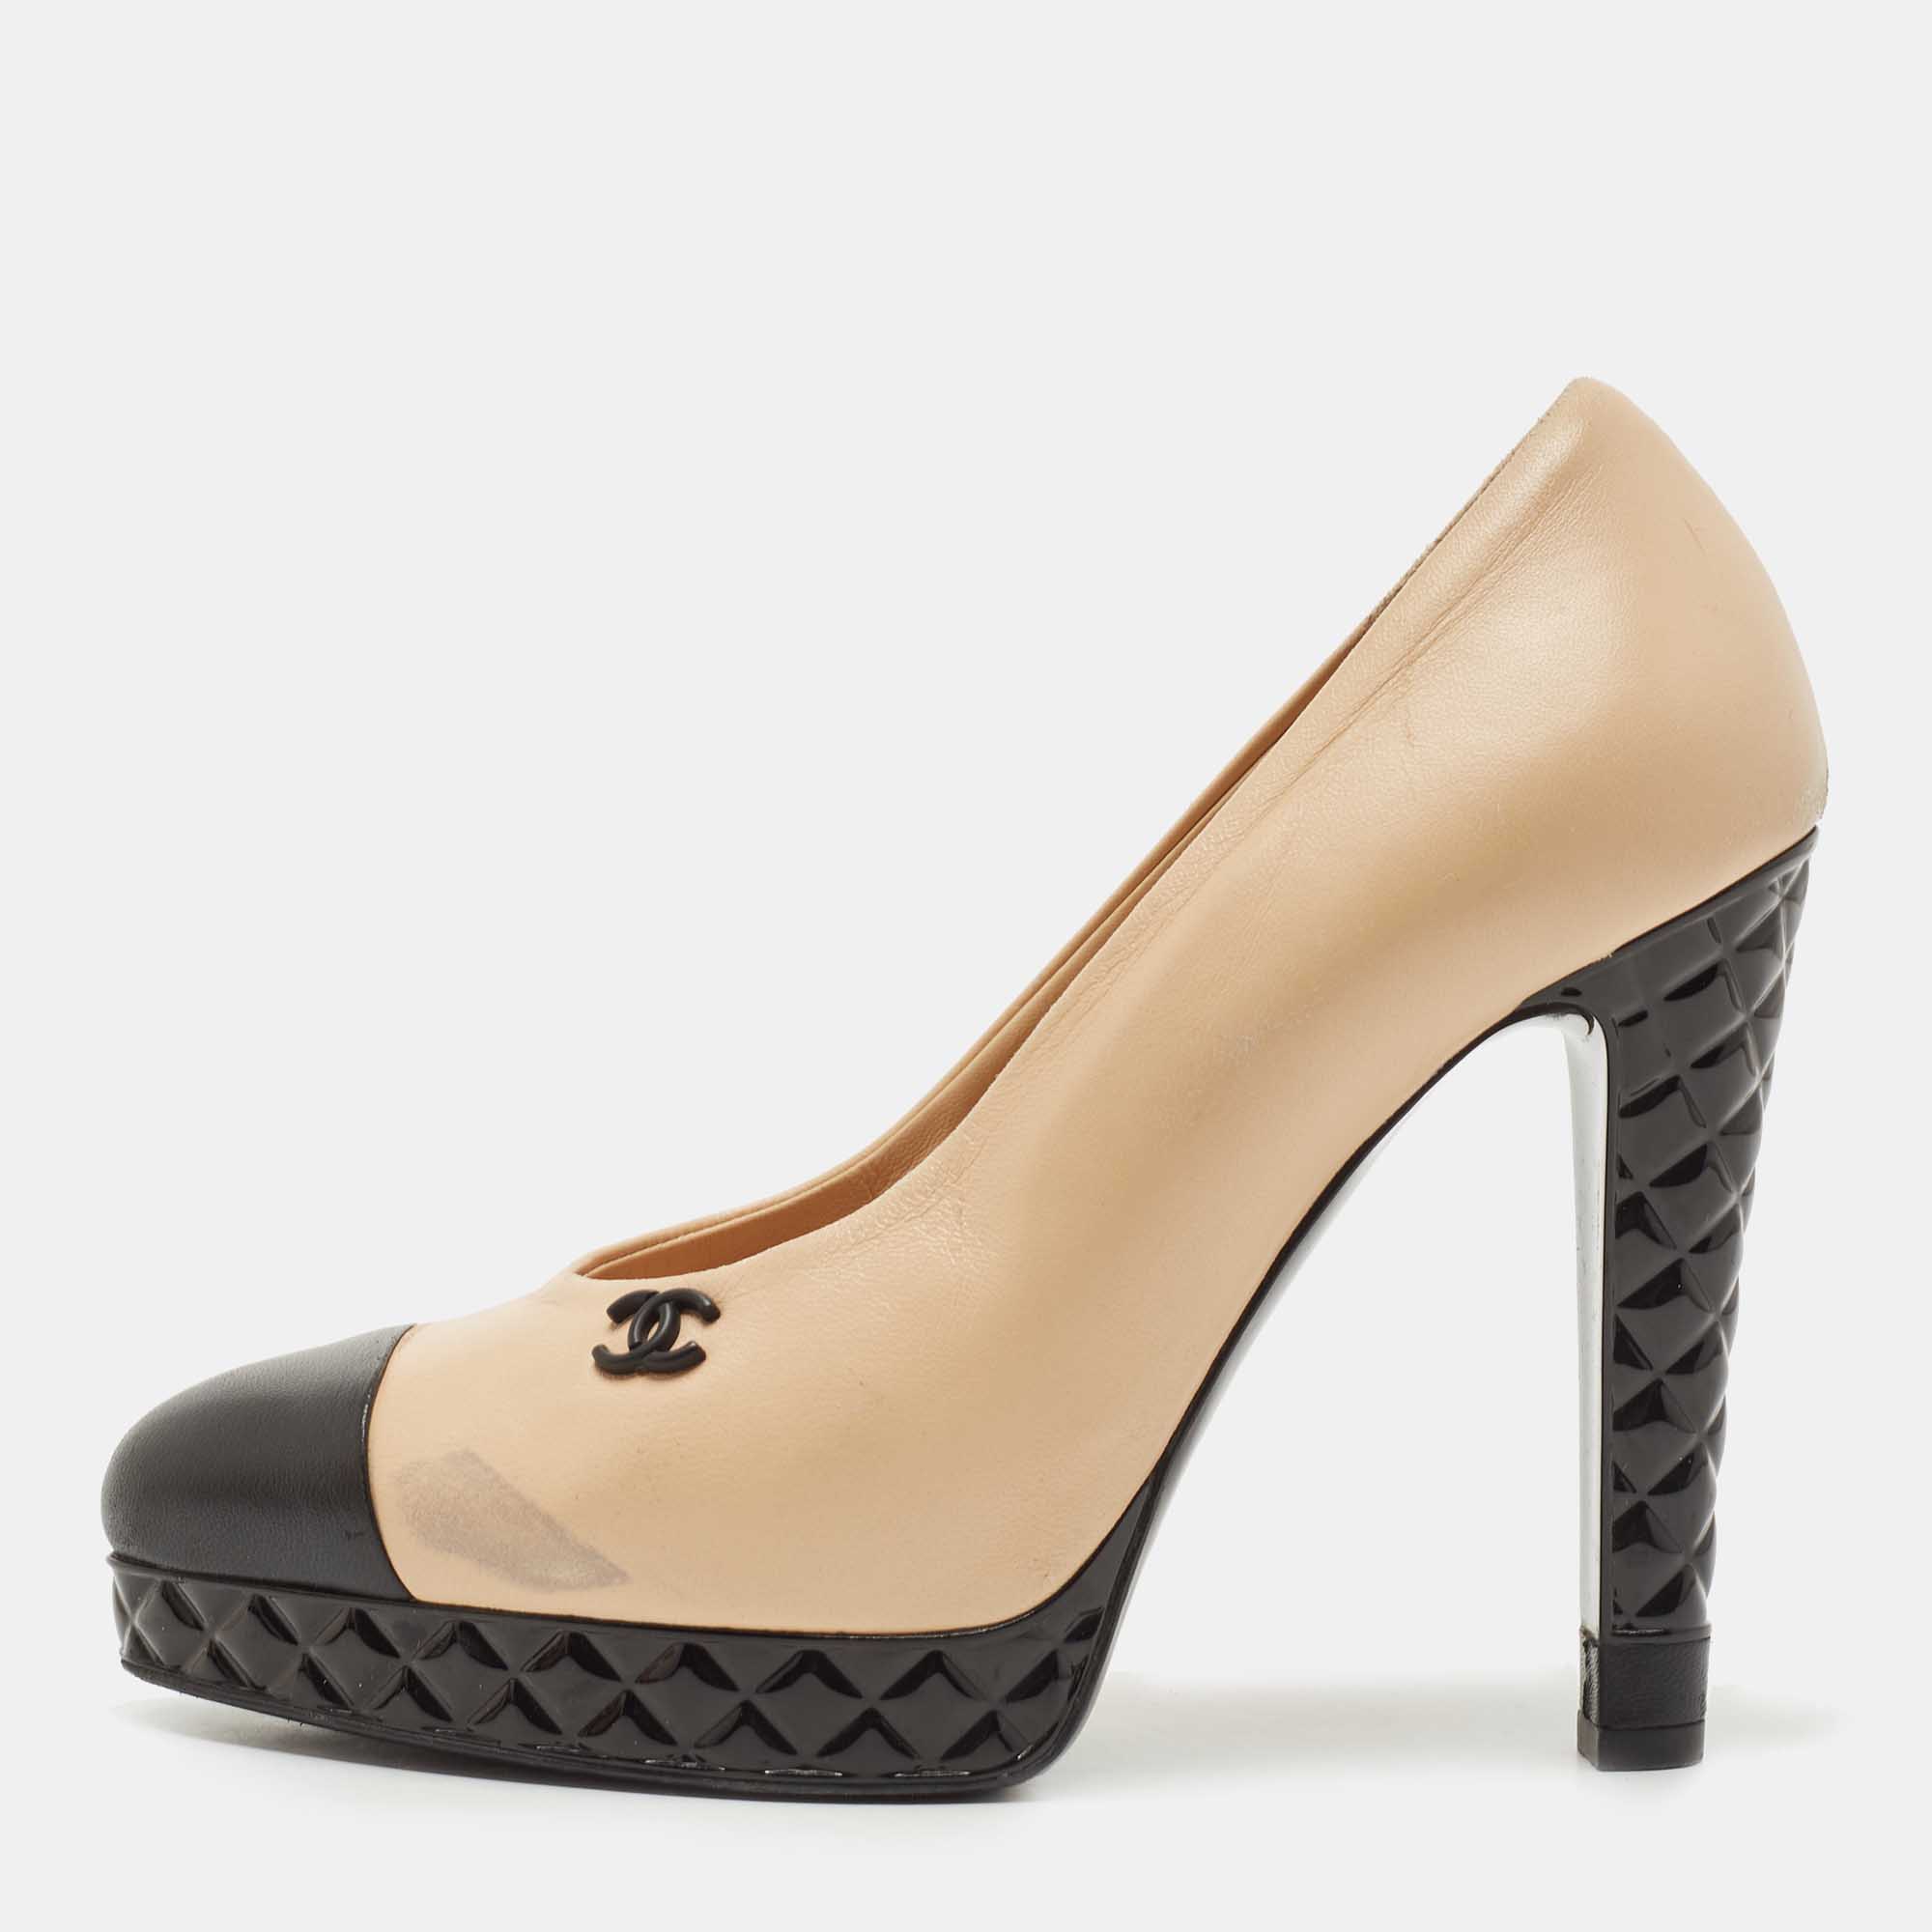 Pre-owned Chanel Beige/black Leather Cc Quilted Platform Pumps